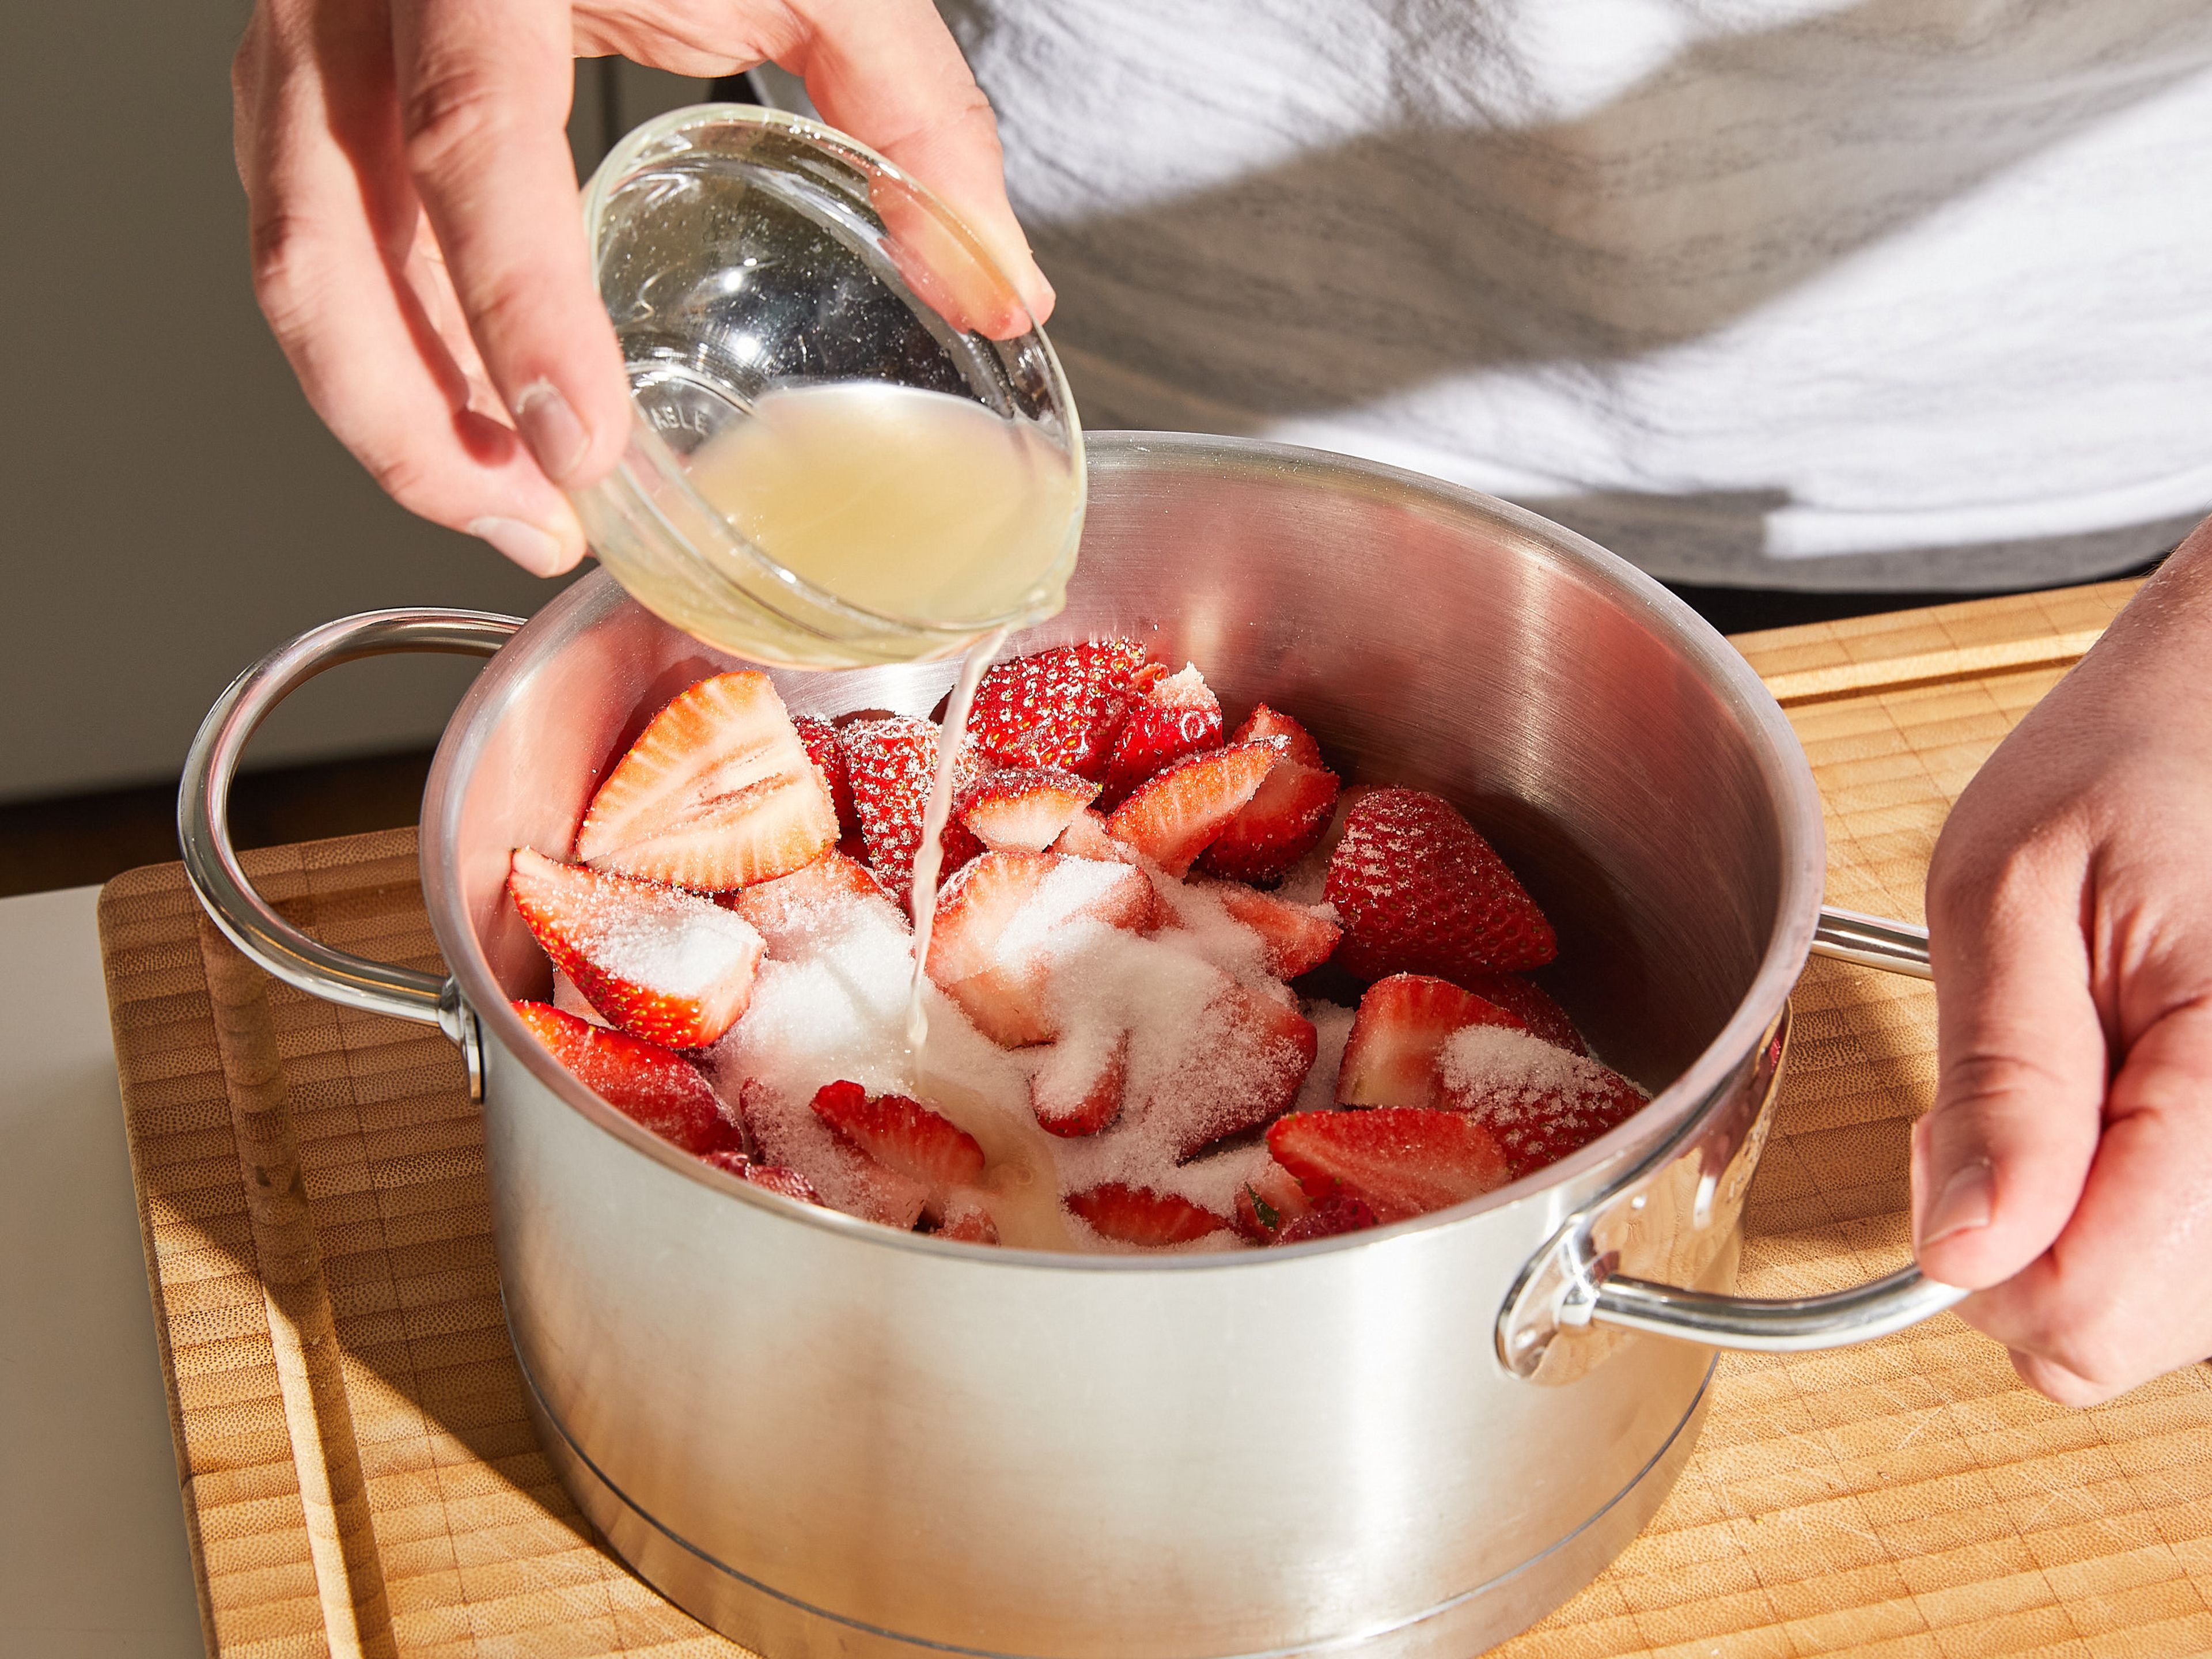 Remove the stalk from the strawberries and quarter, saving a few whole strawberries for serving. Transfer strawberries to a saucepan and toss with sugar and lemon juice. Set aside.